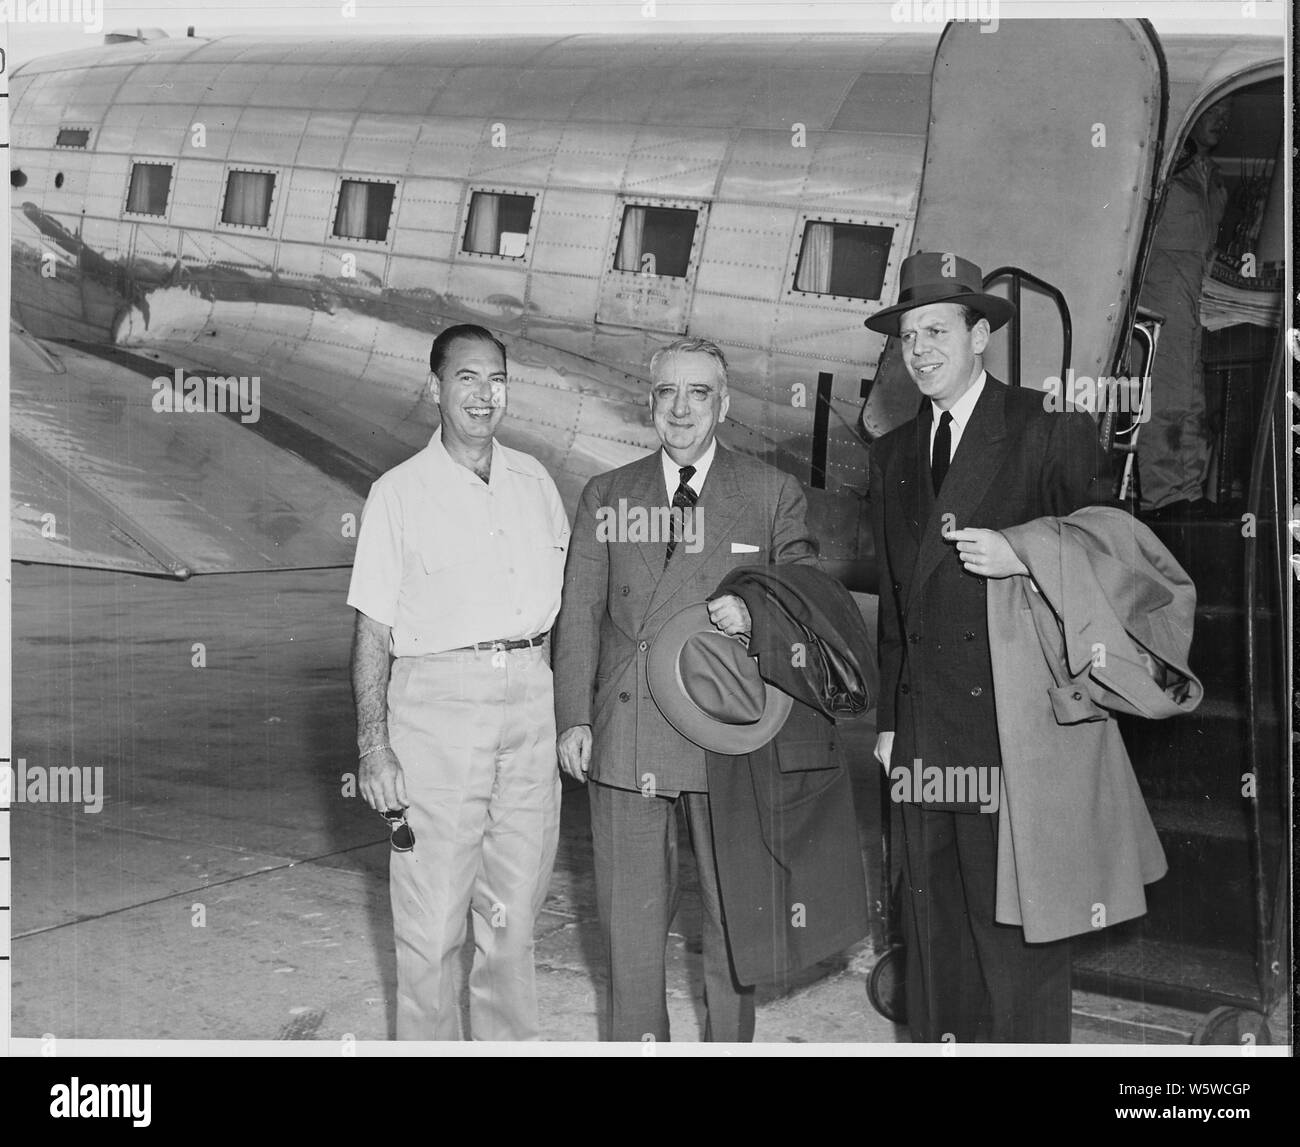 Photograph of Rear Admiral Robert Dennison, Naval Aide to the President, with Chief Justice Fred Vinson and Clark Clifford, ex-Special Counsel to the President (right), who have arrived at Boca Chica airport to join President Truman's vacation party at Key West, Florida. Stock Photo